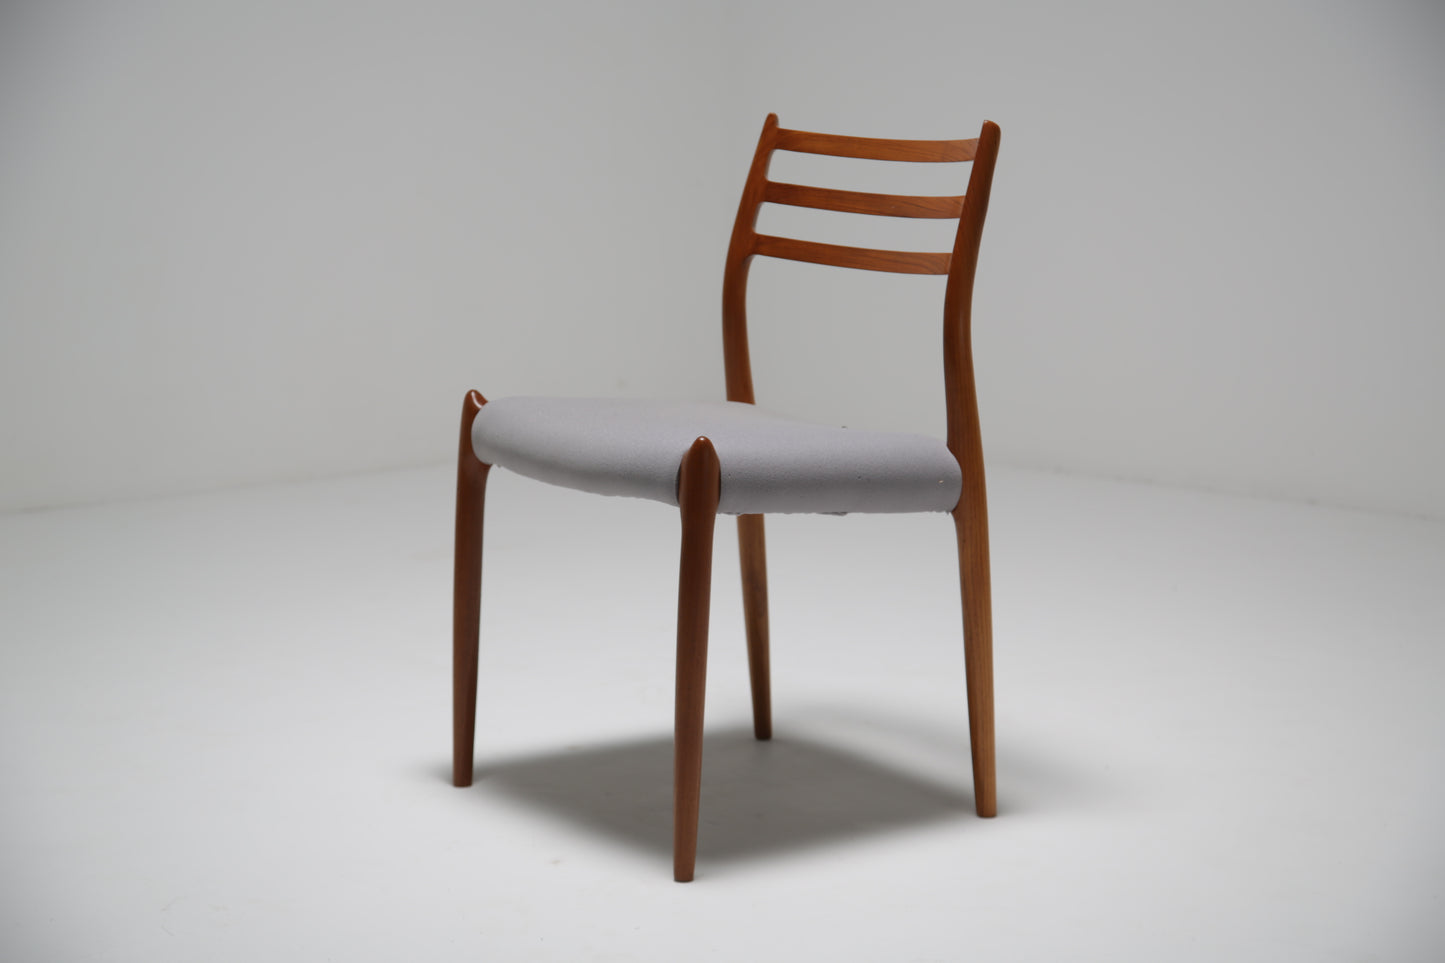 1960s Niels Moller Model 62 & 78 dining chairs